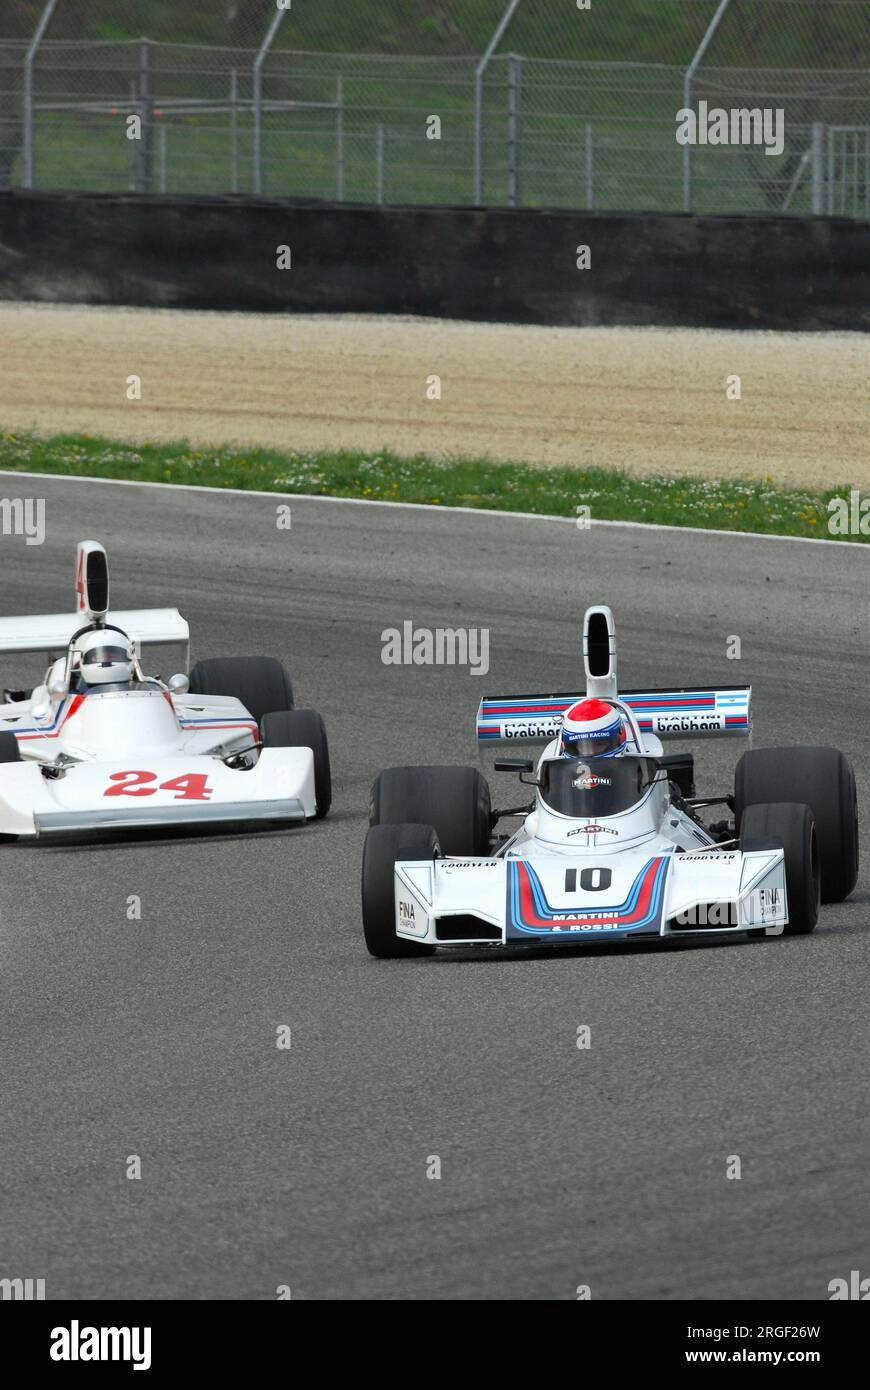 8 Carlos Pace in a Brabham Cosworth BT44B finished 5th in the Dutch GP  Zandvoort 22nd June 1975 Stock Photo - Alamy